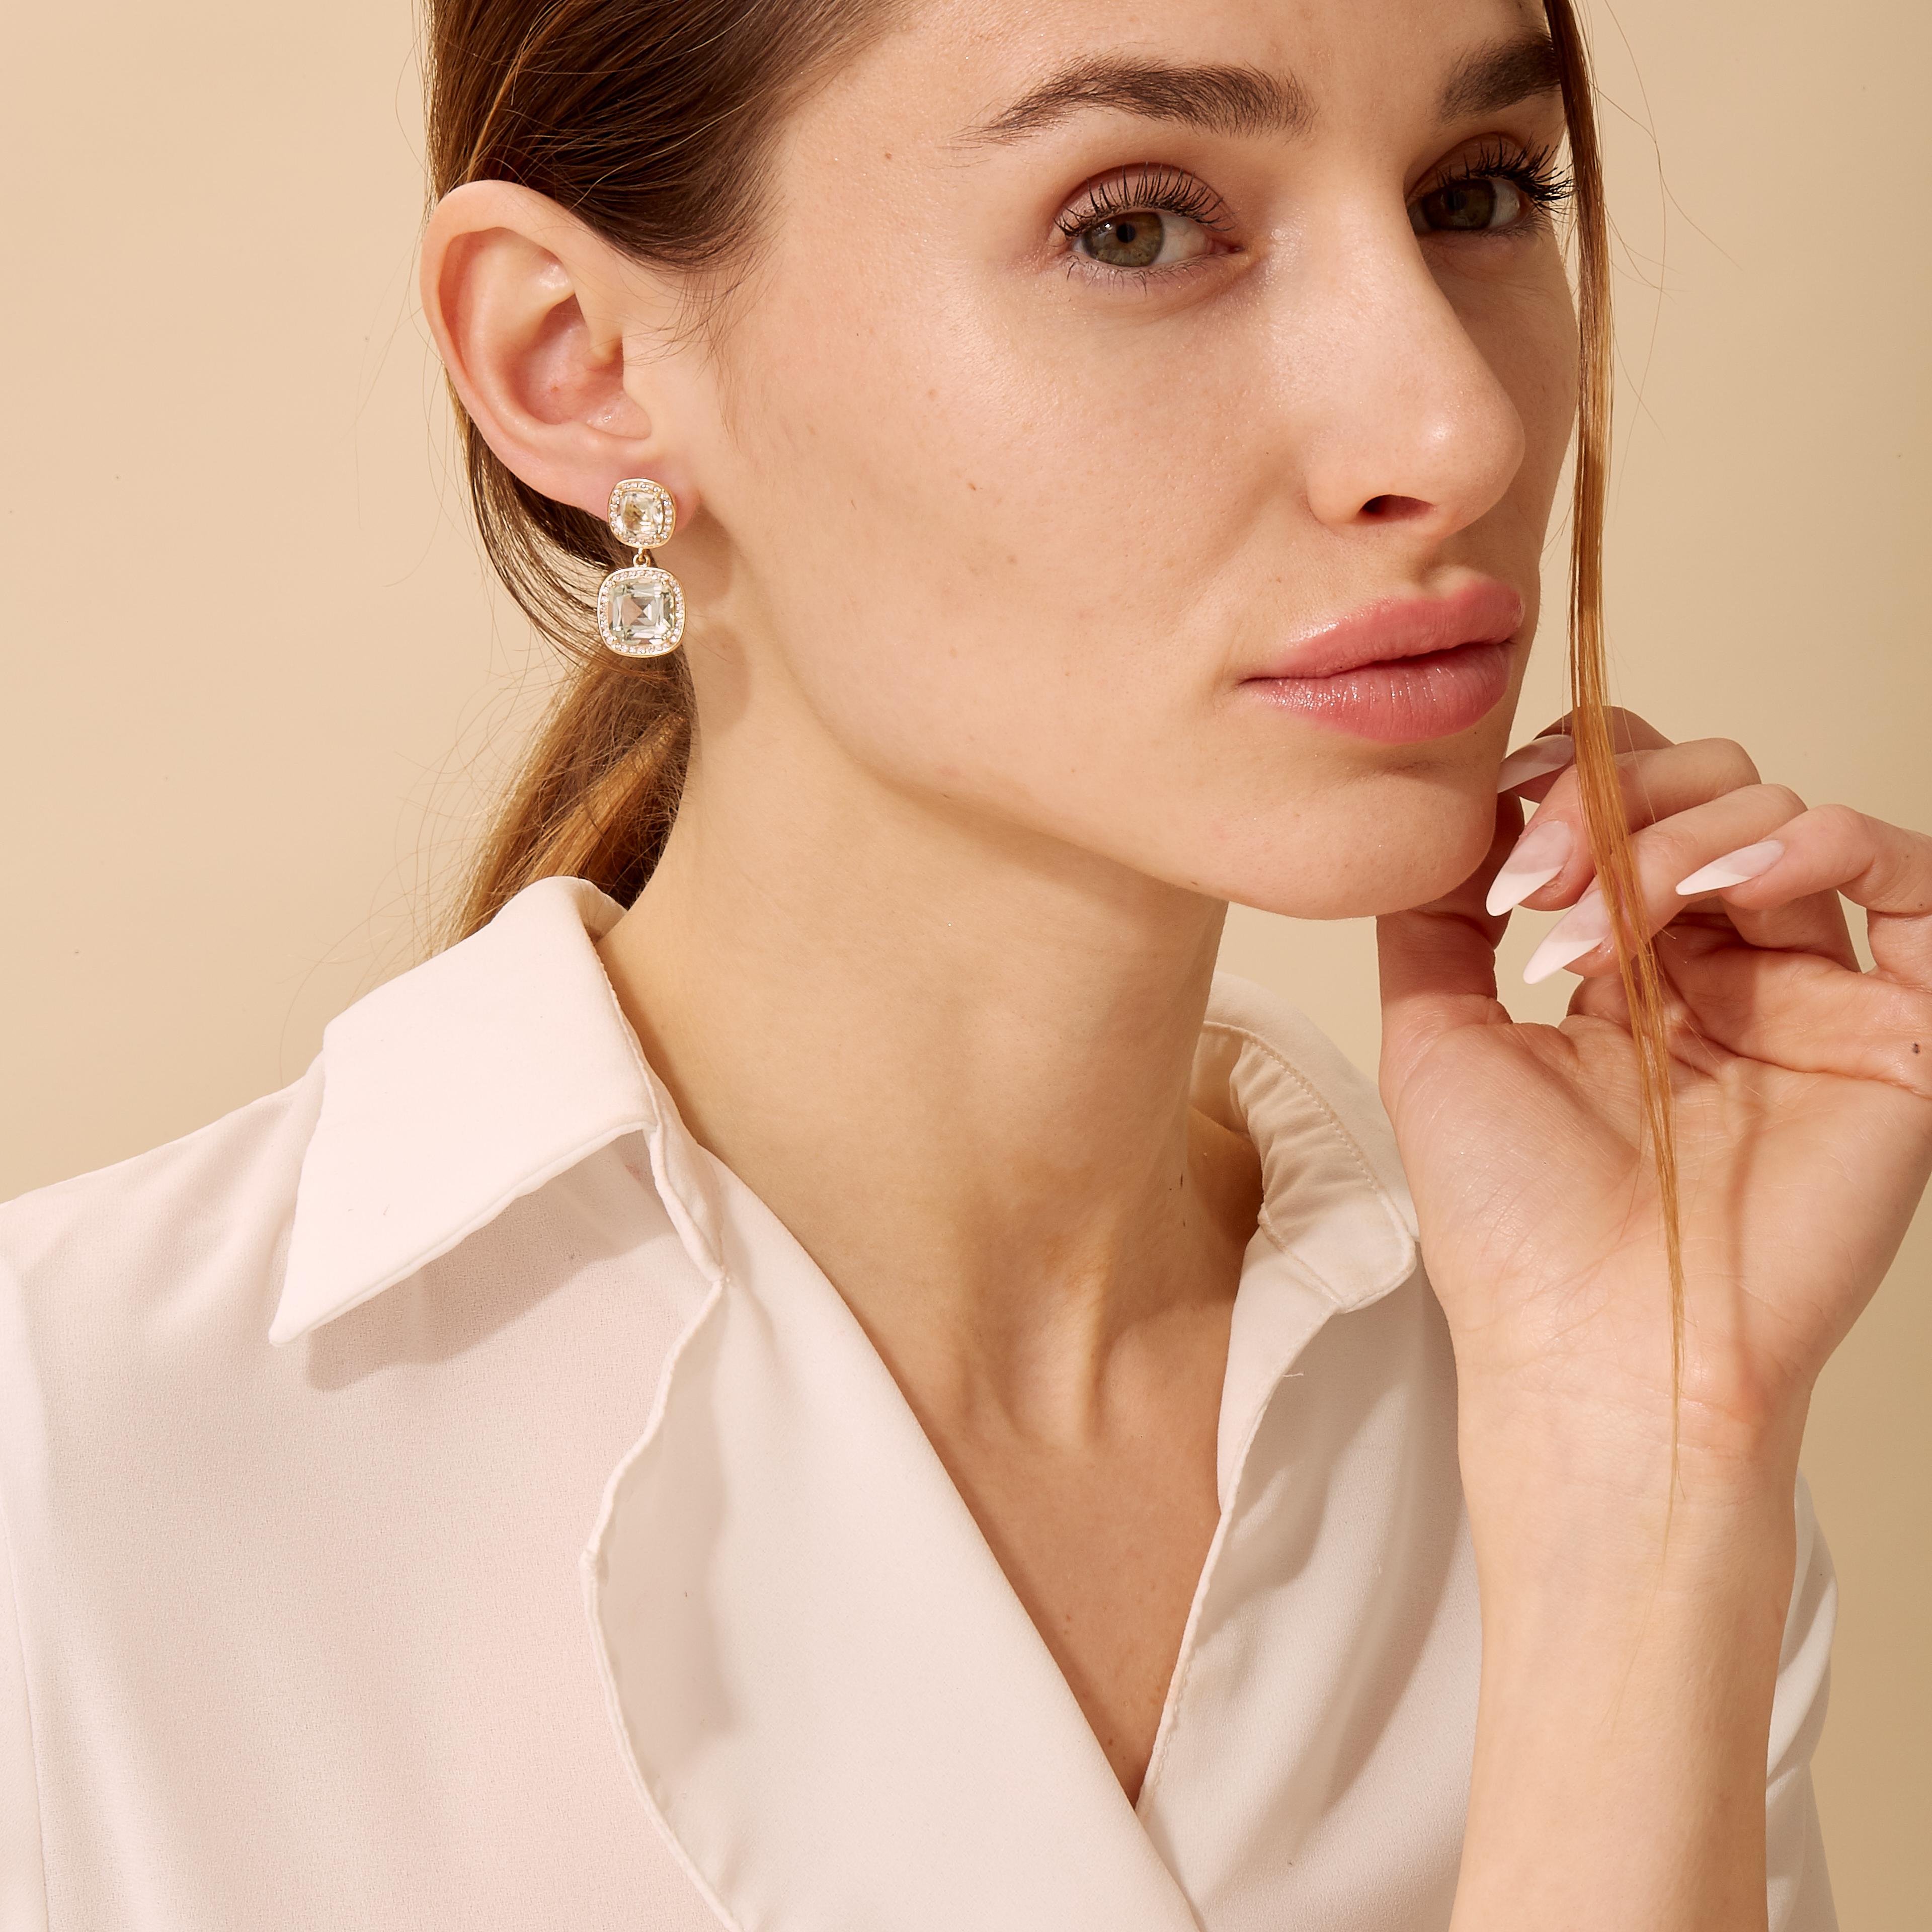 Created in 18 karat yellow gold
Prasiolite Quartz 10.50 carats approx.
Diamonds 0.60 carat approx.
18kyg butterfly backs
Limited edition

Exquisitely crafted in 18 karat yellow gold, these limited edition earrings feature a stunning Prasiolite